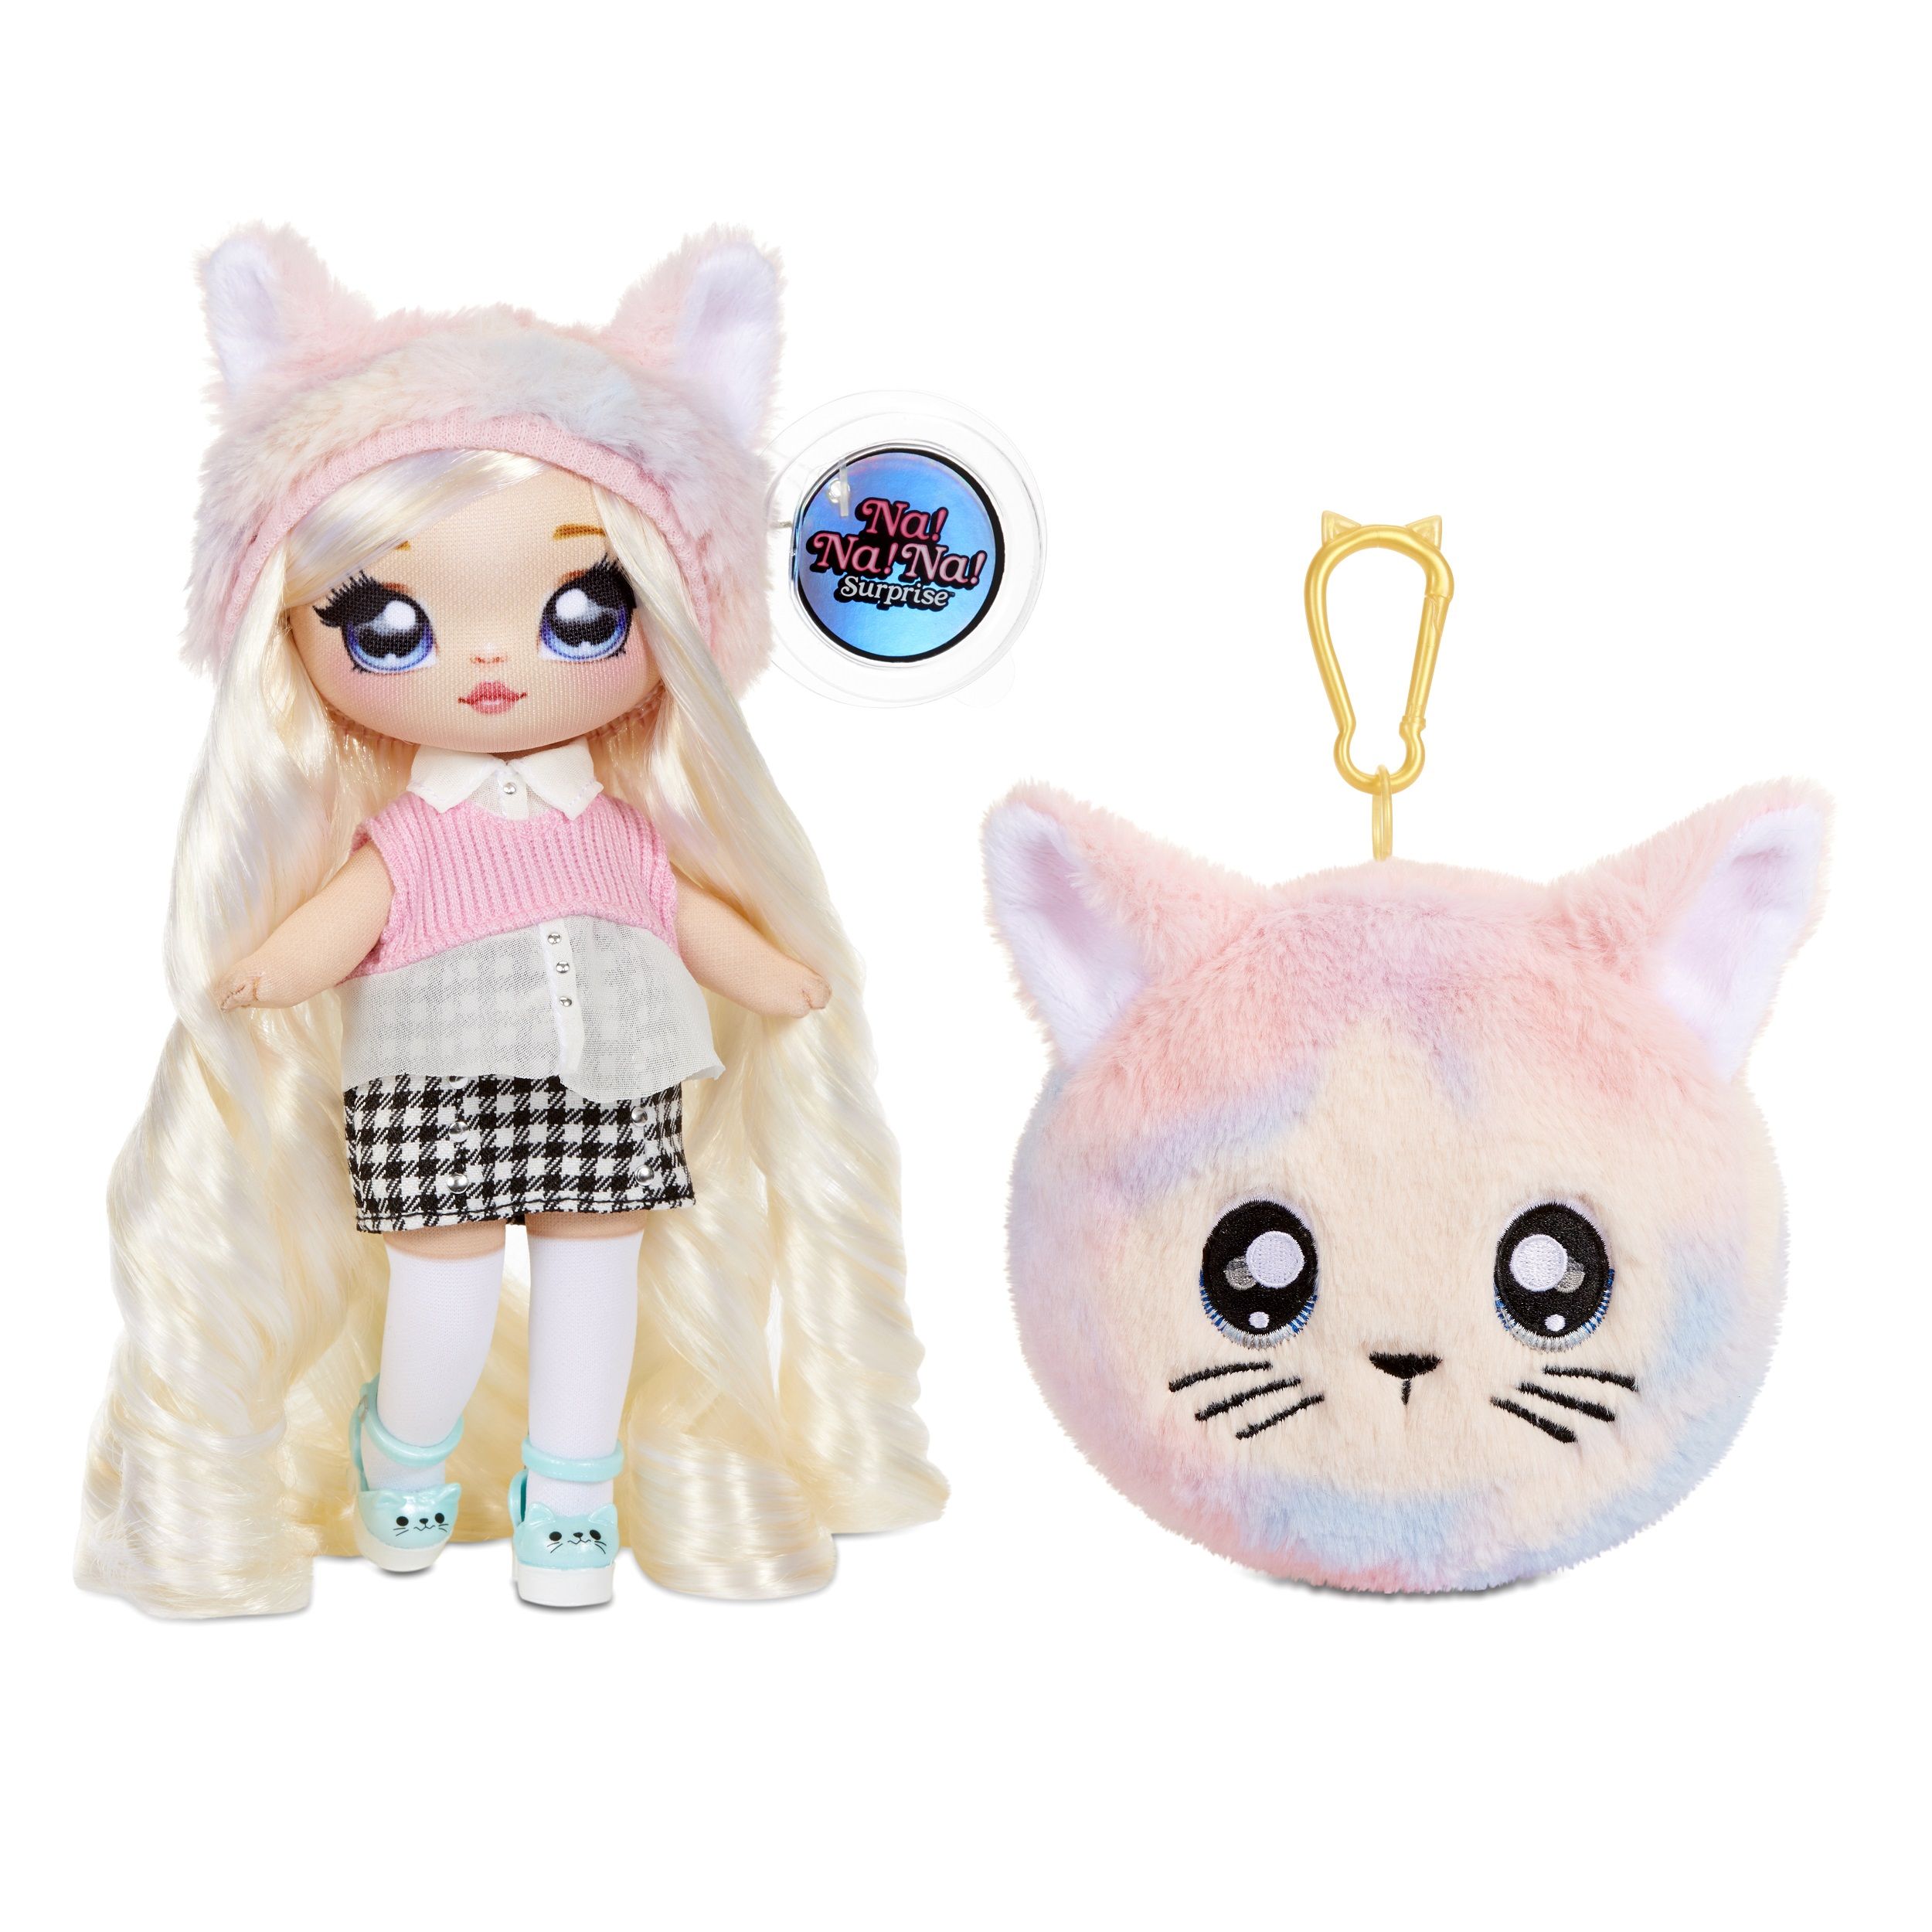 Na! Na! Na! Surprise 2 In 1 Fashion Doll And Plush Purse Series 4